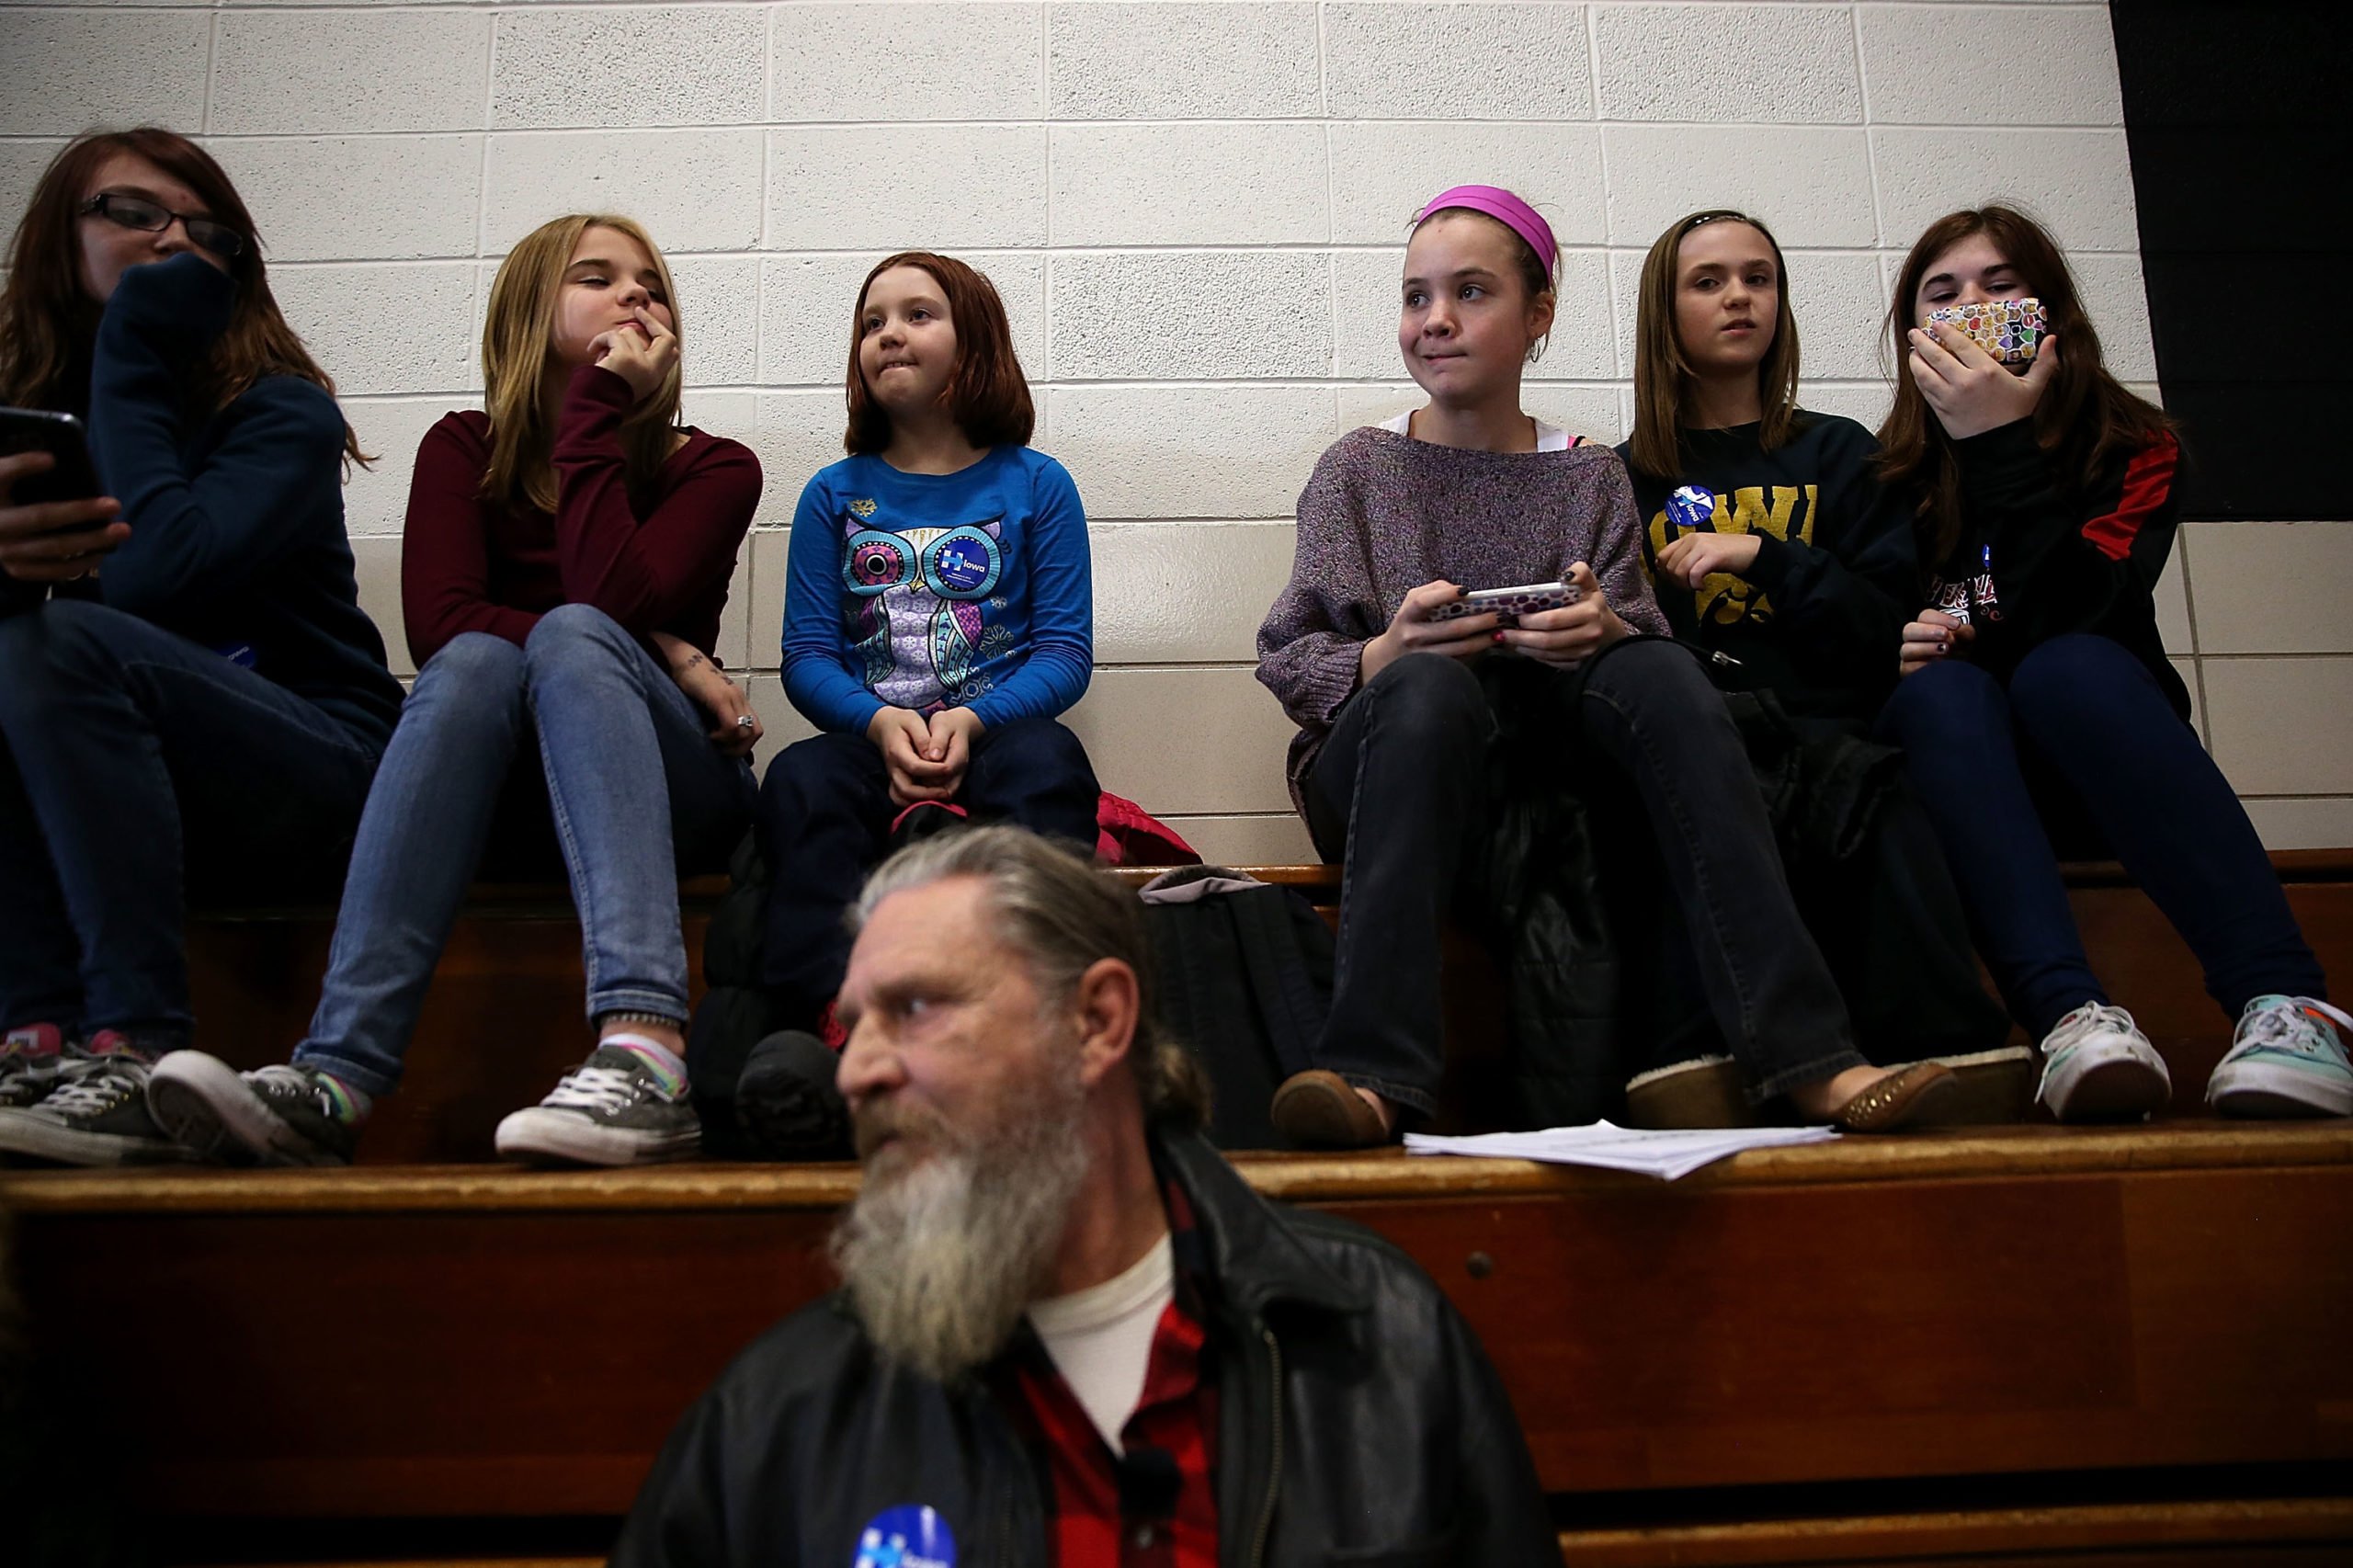 Berg Middle School students wait for Democratic presidential candidate, former Secretary of State Hillary Clinton to take the stage during a "get out the caucus" event at Berg Middle School on January 28, 2016 in Newton, Iowa. With less than a week to go before the Iowa caucuses, Hillary Clinton is campaigning throughout Iowa. (Photo by Justin Sullivan/Getty Images)